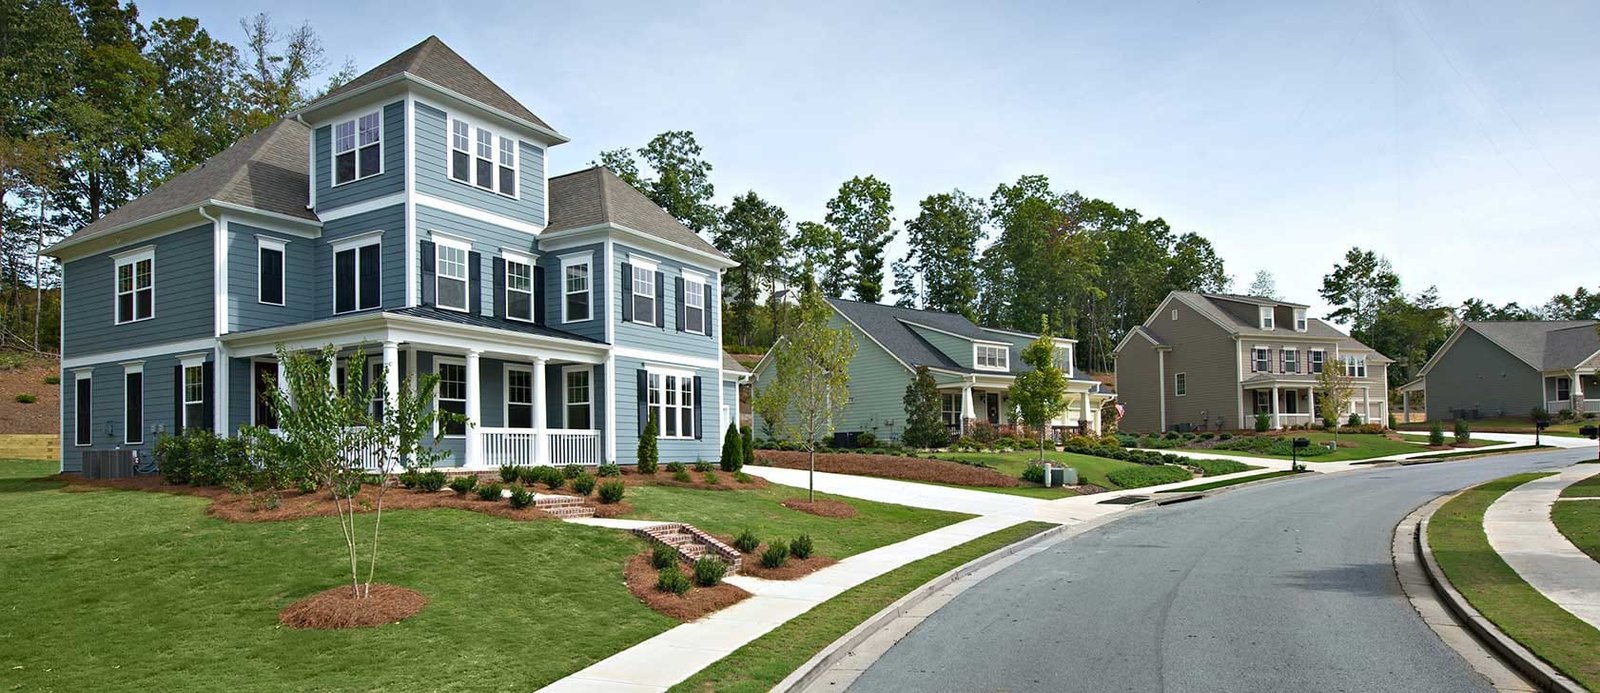 Things To Consider When Building a New House in North Carolina